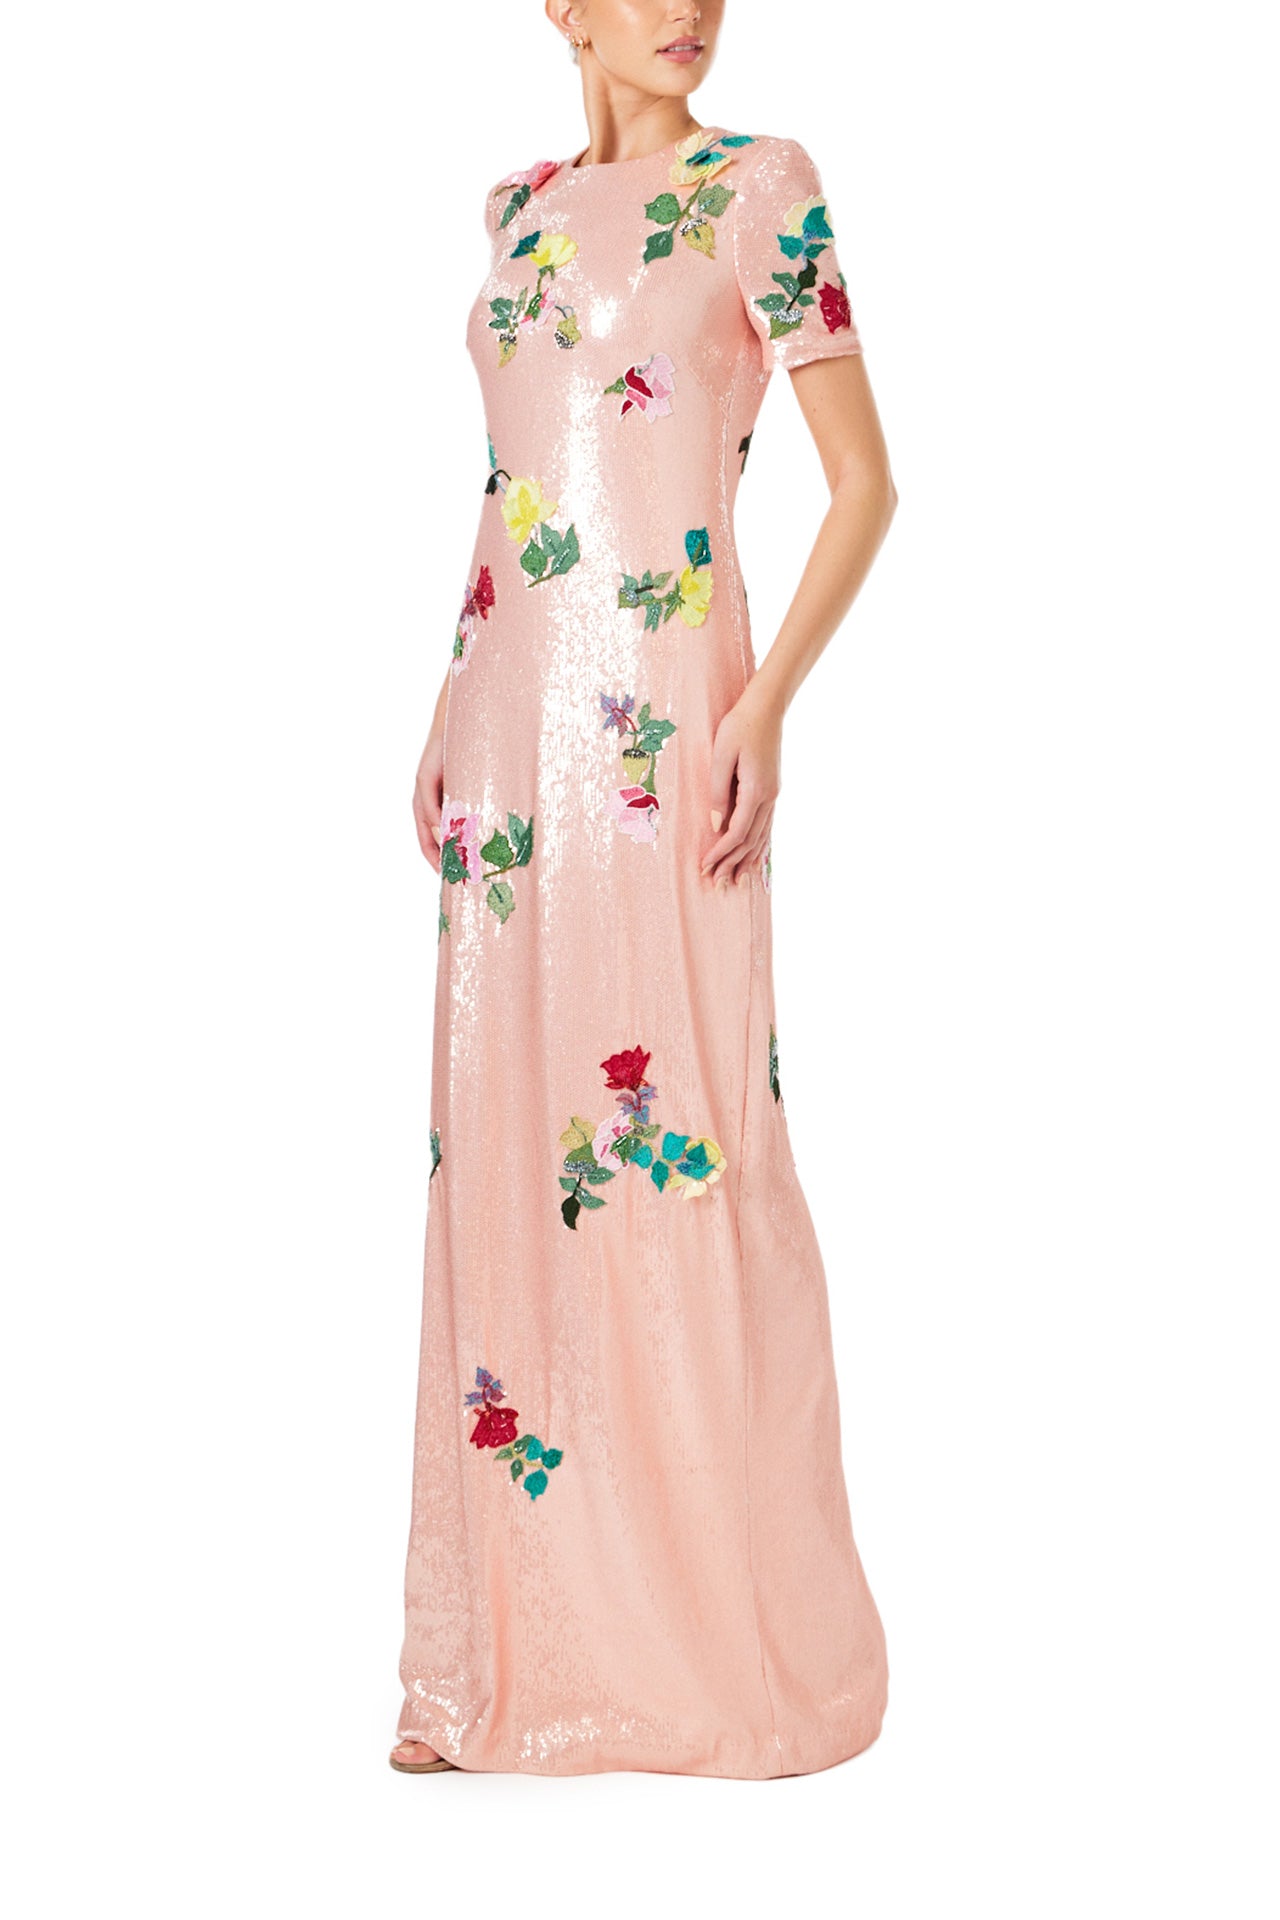 Monique Lhuillier Spring 2024 melon colored sequin gown with short sleeves, jewel neckline and multi-color floral embroidery - left side.